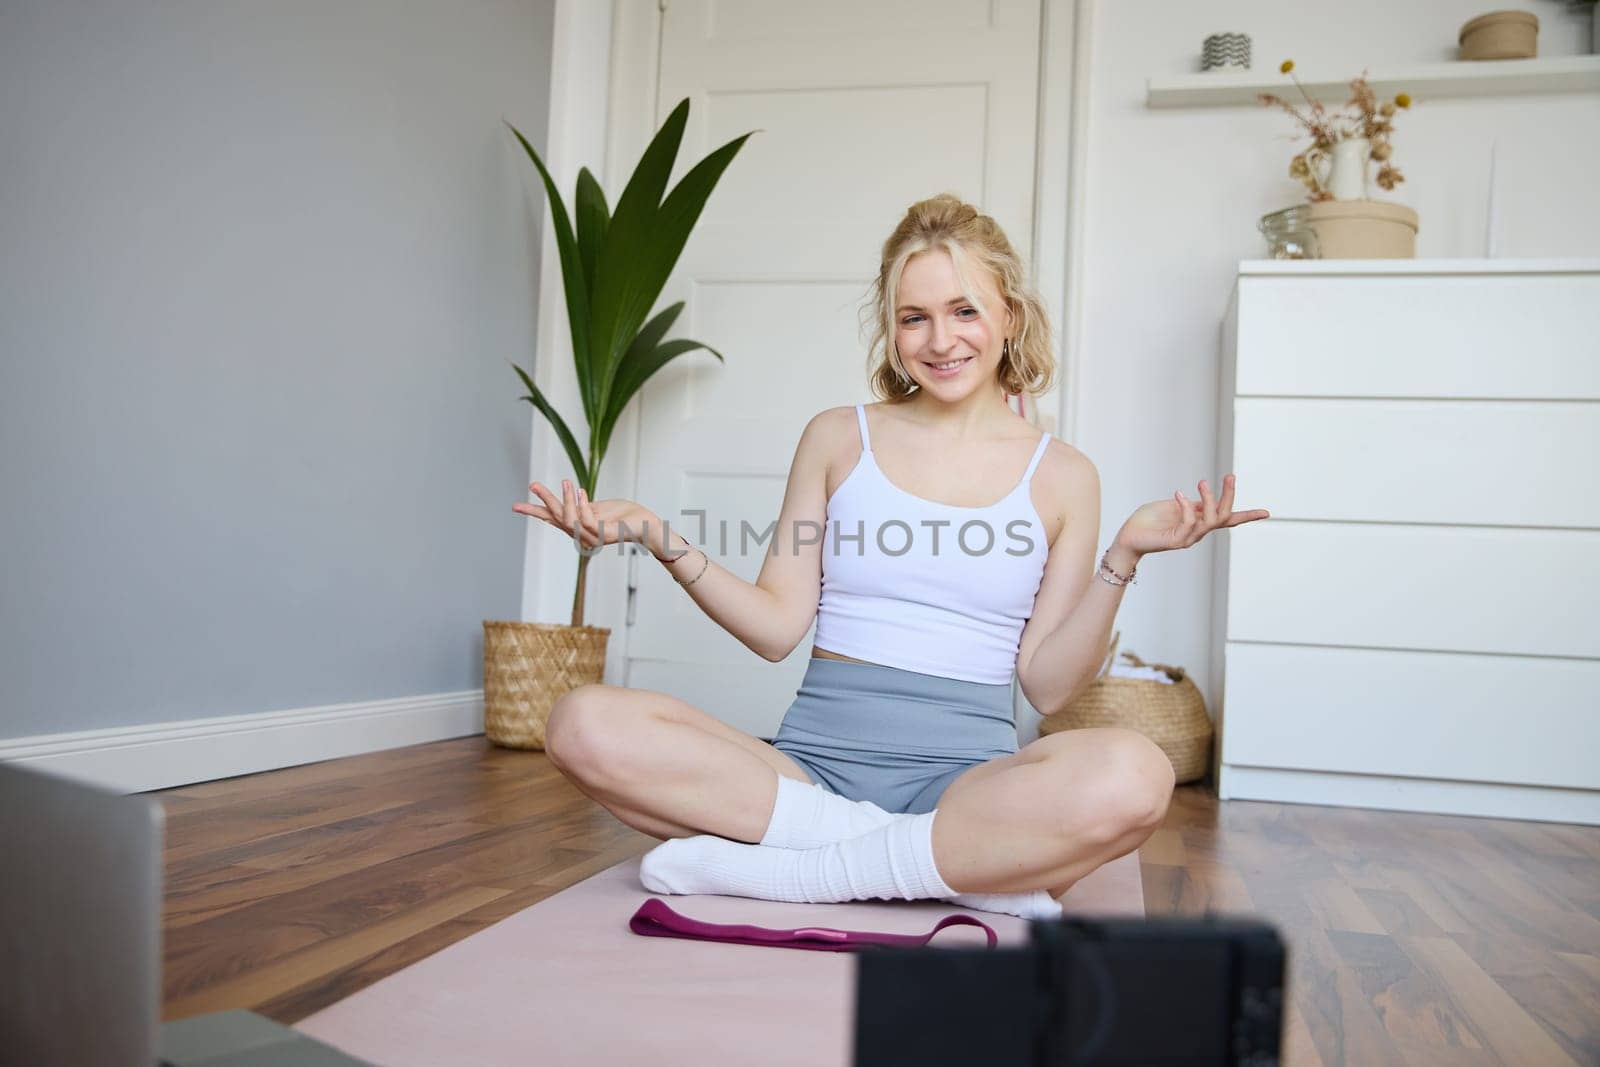 Young female athlete, fitness instructor woman sits on floor rubber mat, recording video on digital camera, showing how to workout, explaining exercises.